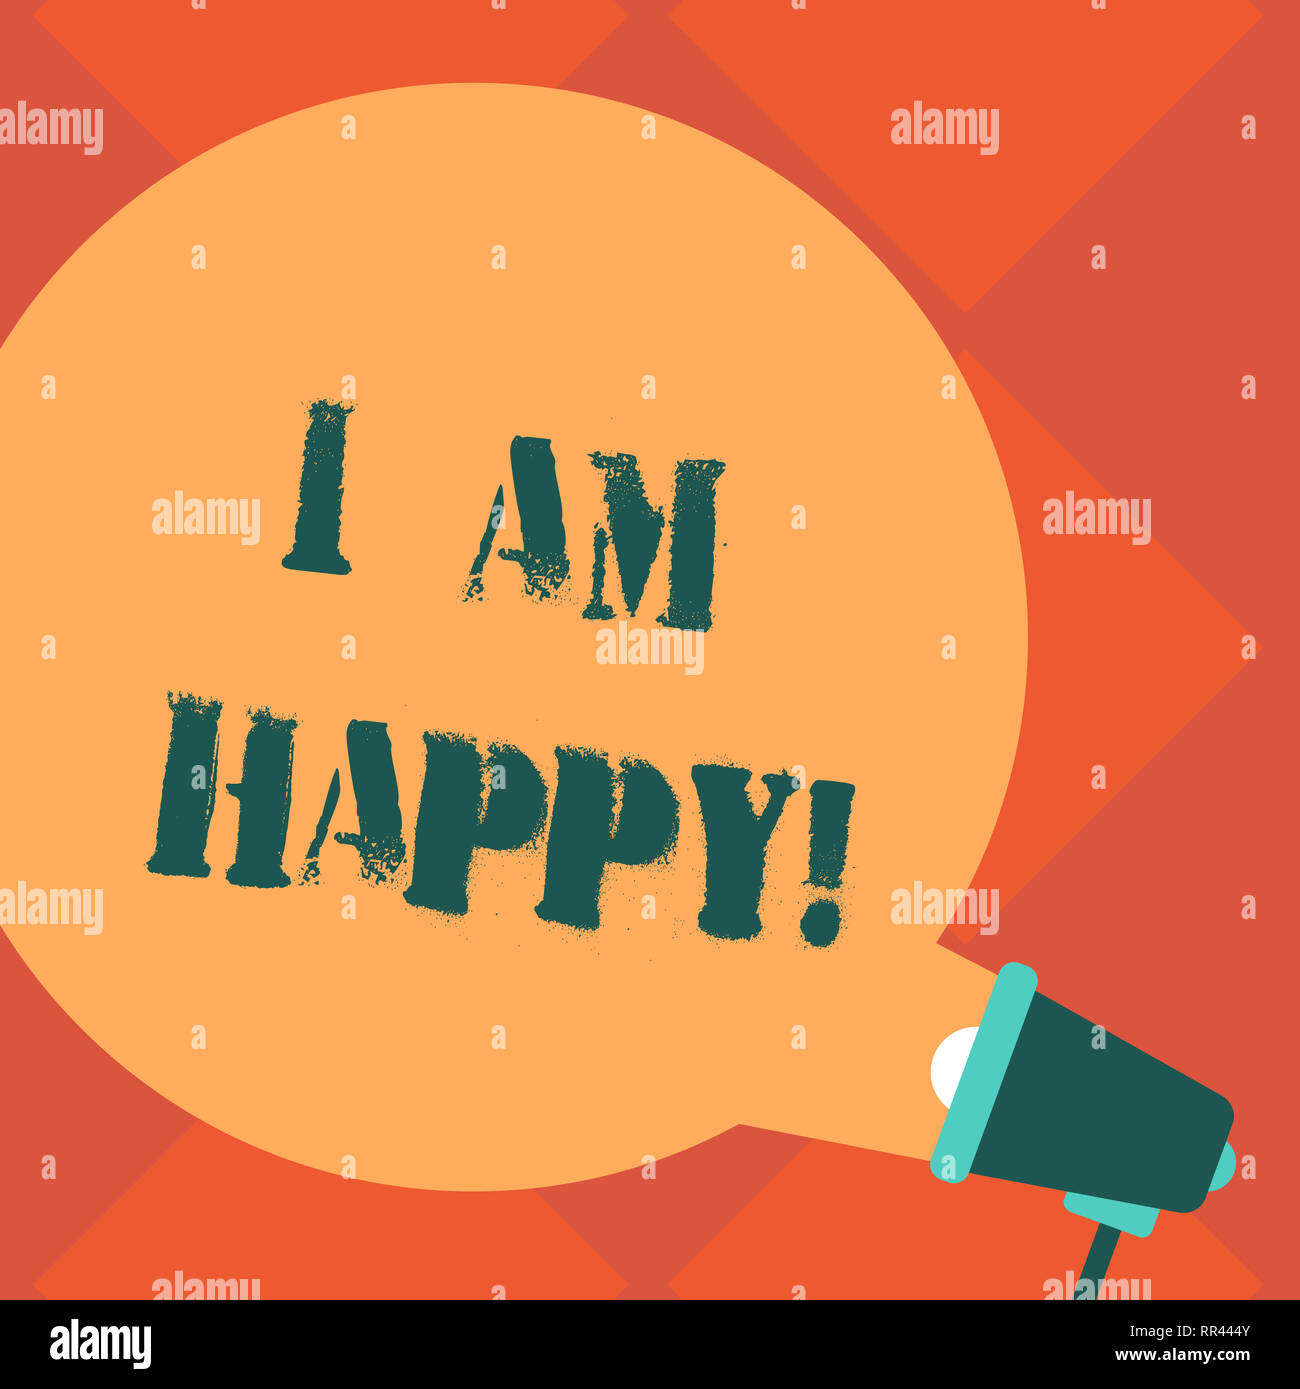 Handwriting Text I Am Happy Concept Meaning To Have A Fulfilled Life Full Of Love Good Job Happiness Blank Round Color Speech Bubble Coming Out Of Me Stock Photo Alamy